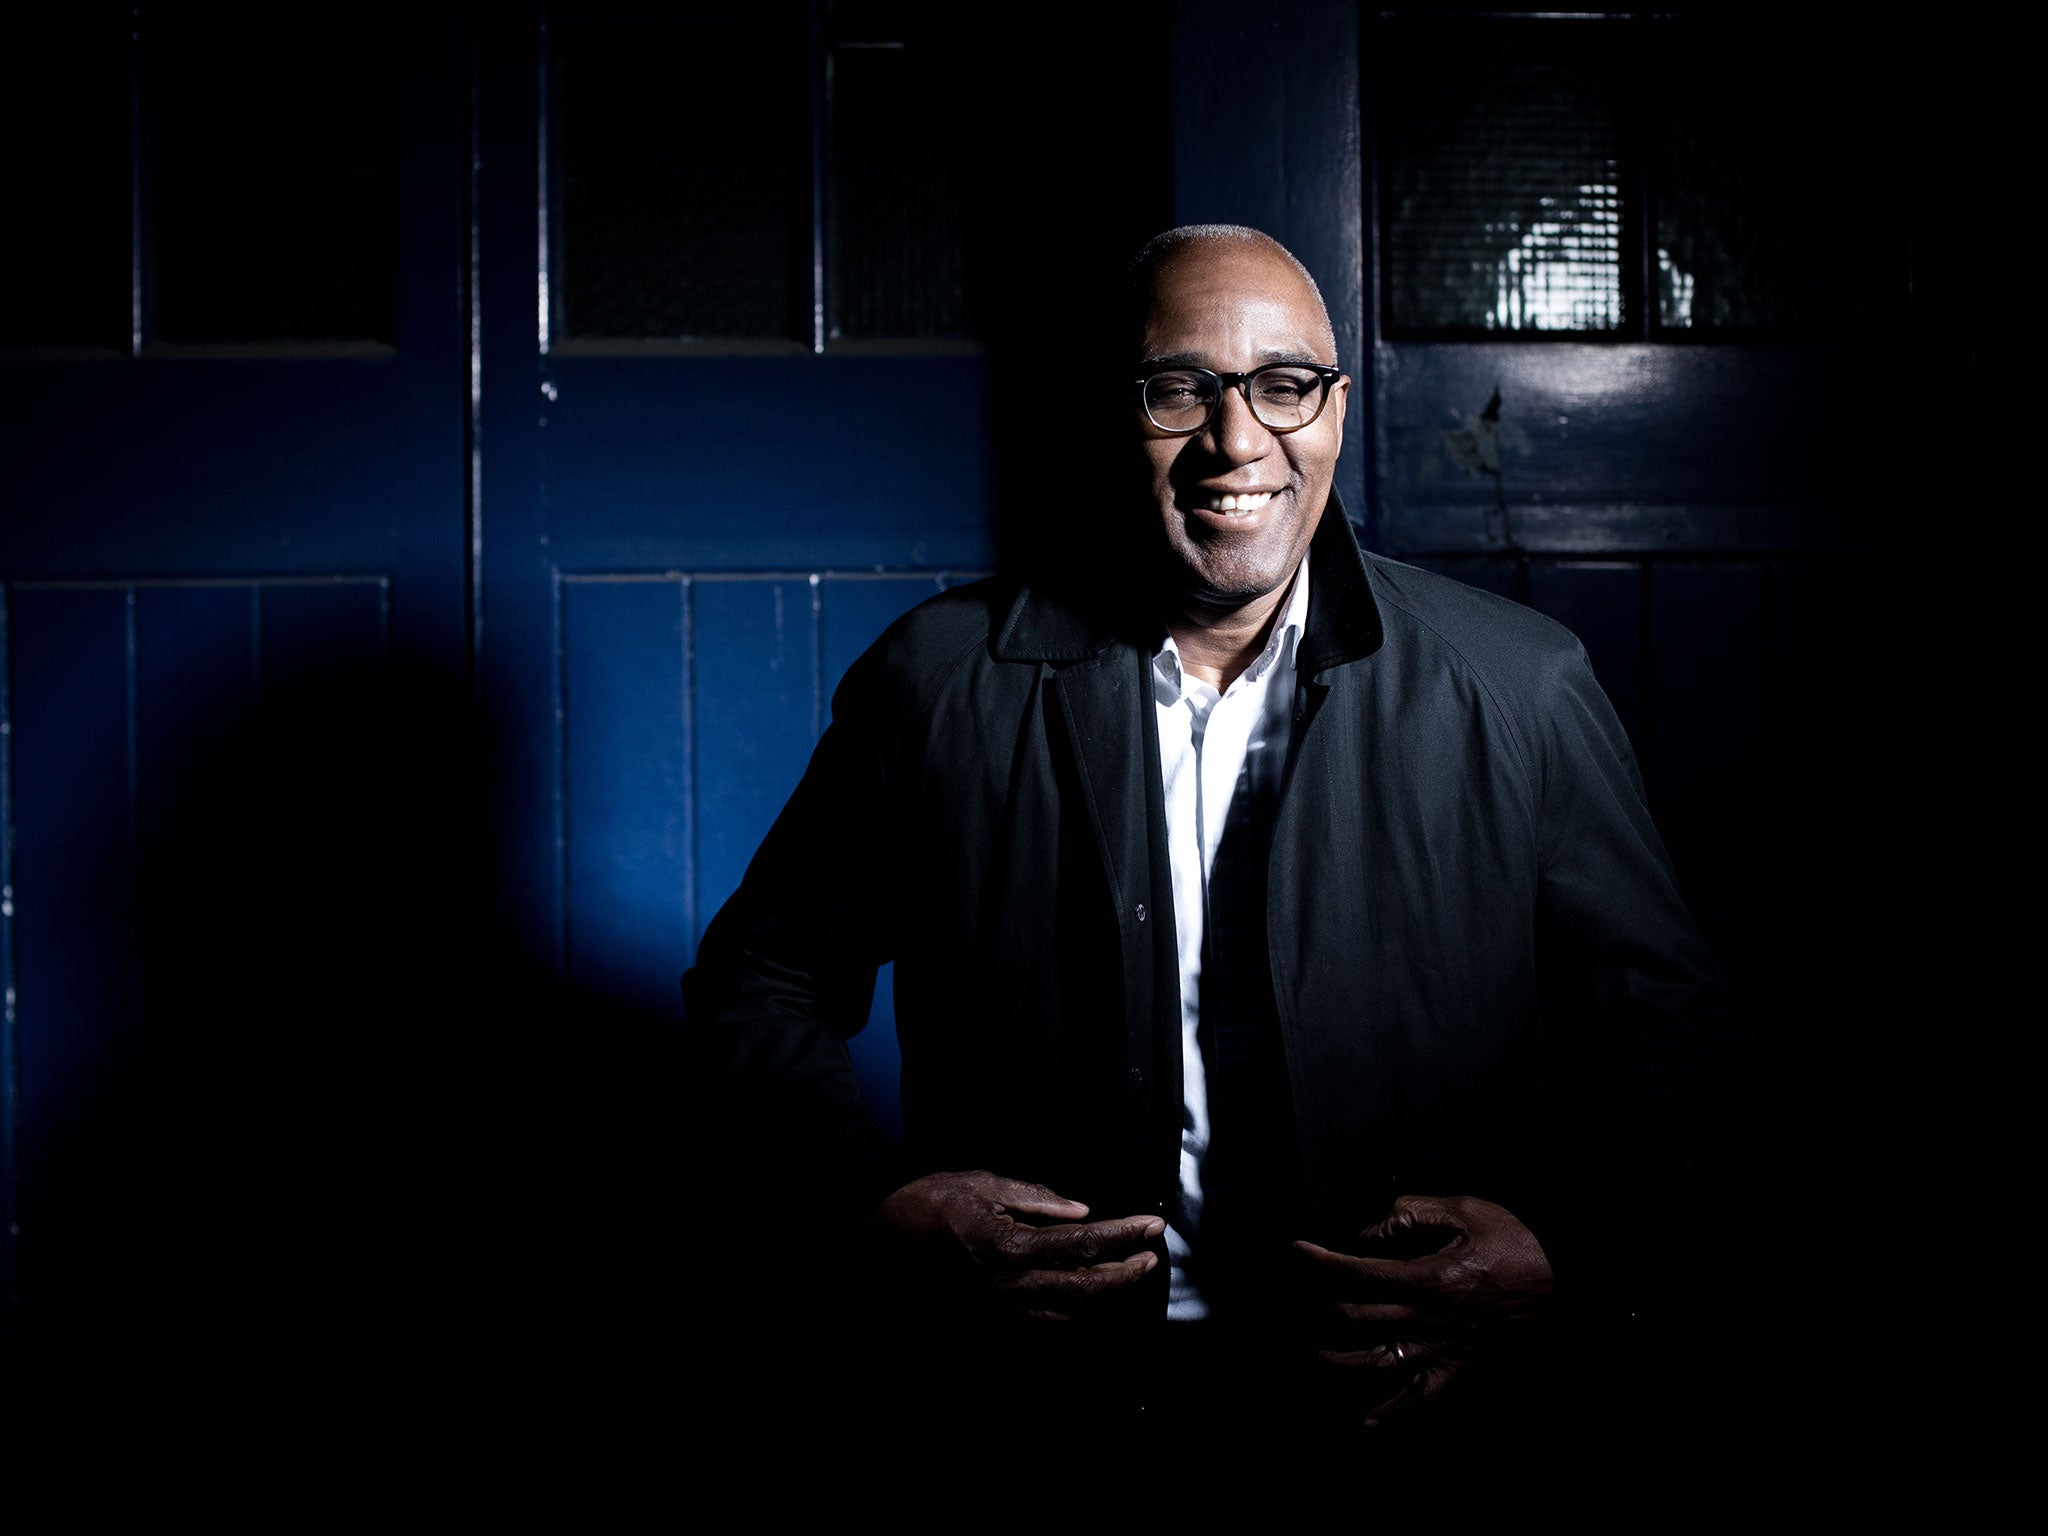 Trevor Phillips is fronting a Channel 4 documentary about British Muslims, based on new research about their attitudes